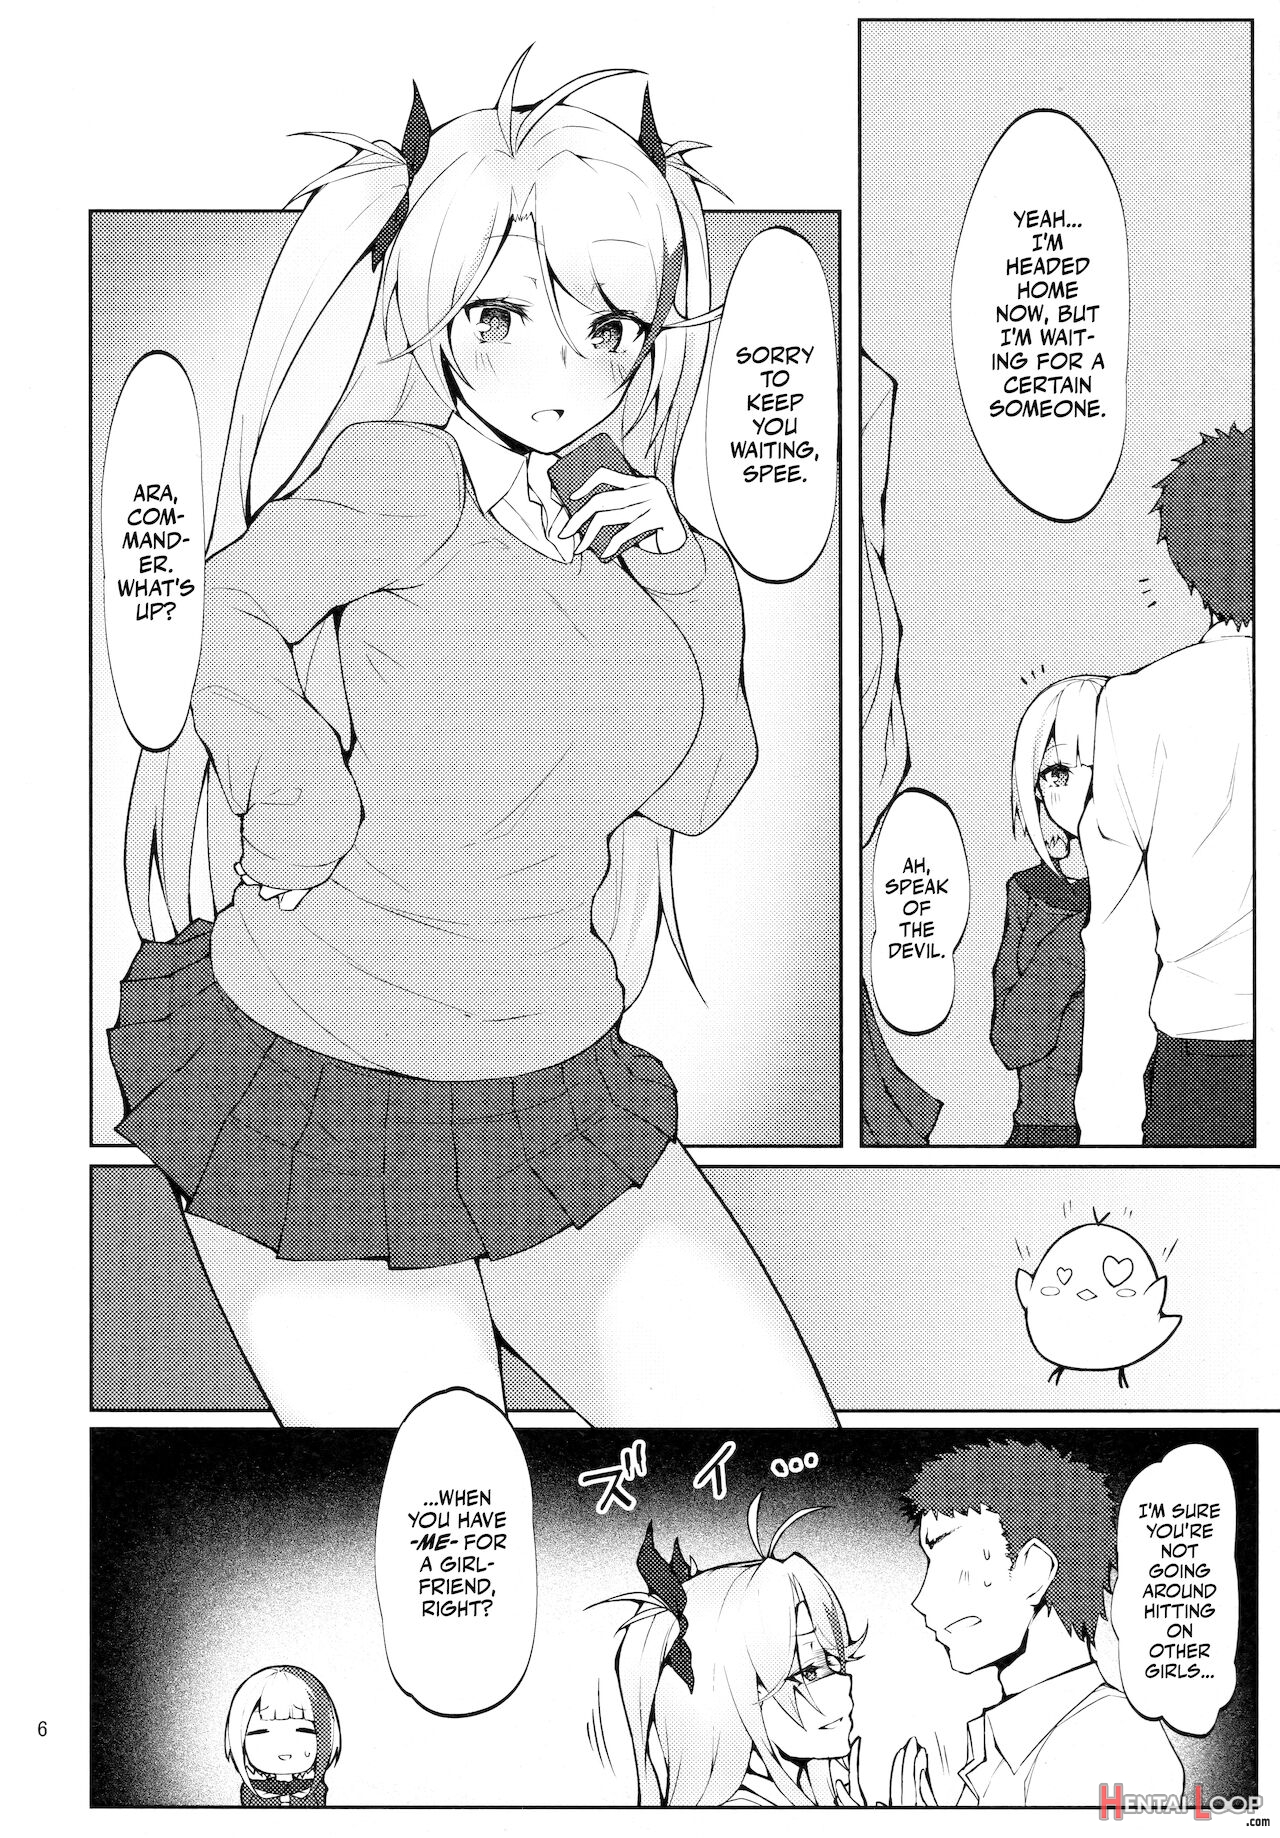 Does The Younger Sister Shipgirl Like Doing It In School Uniforms? page 4